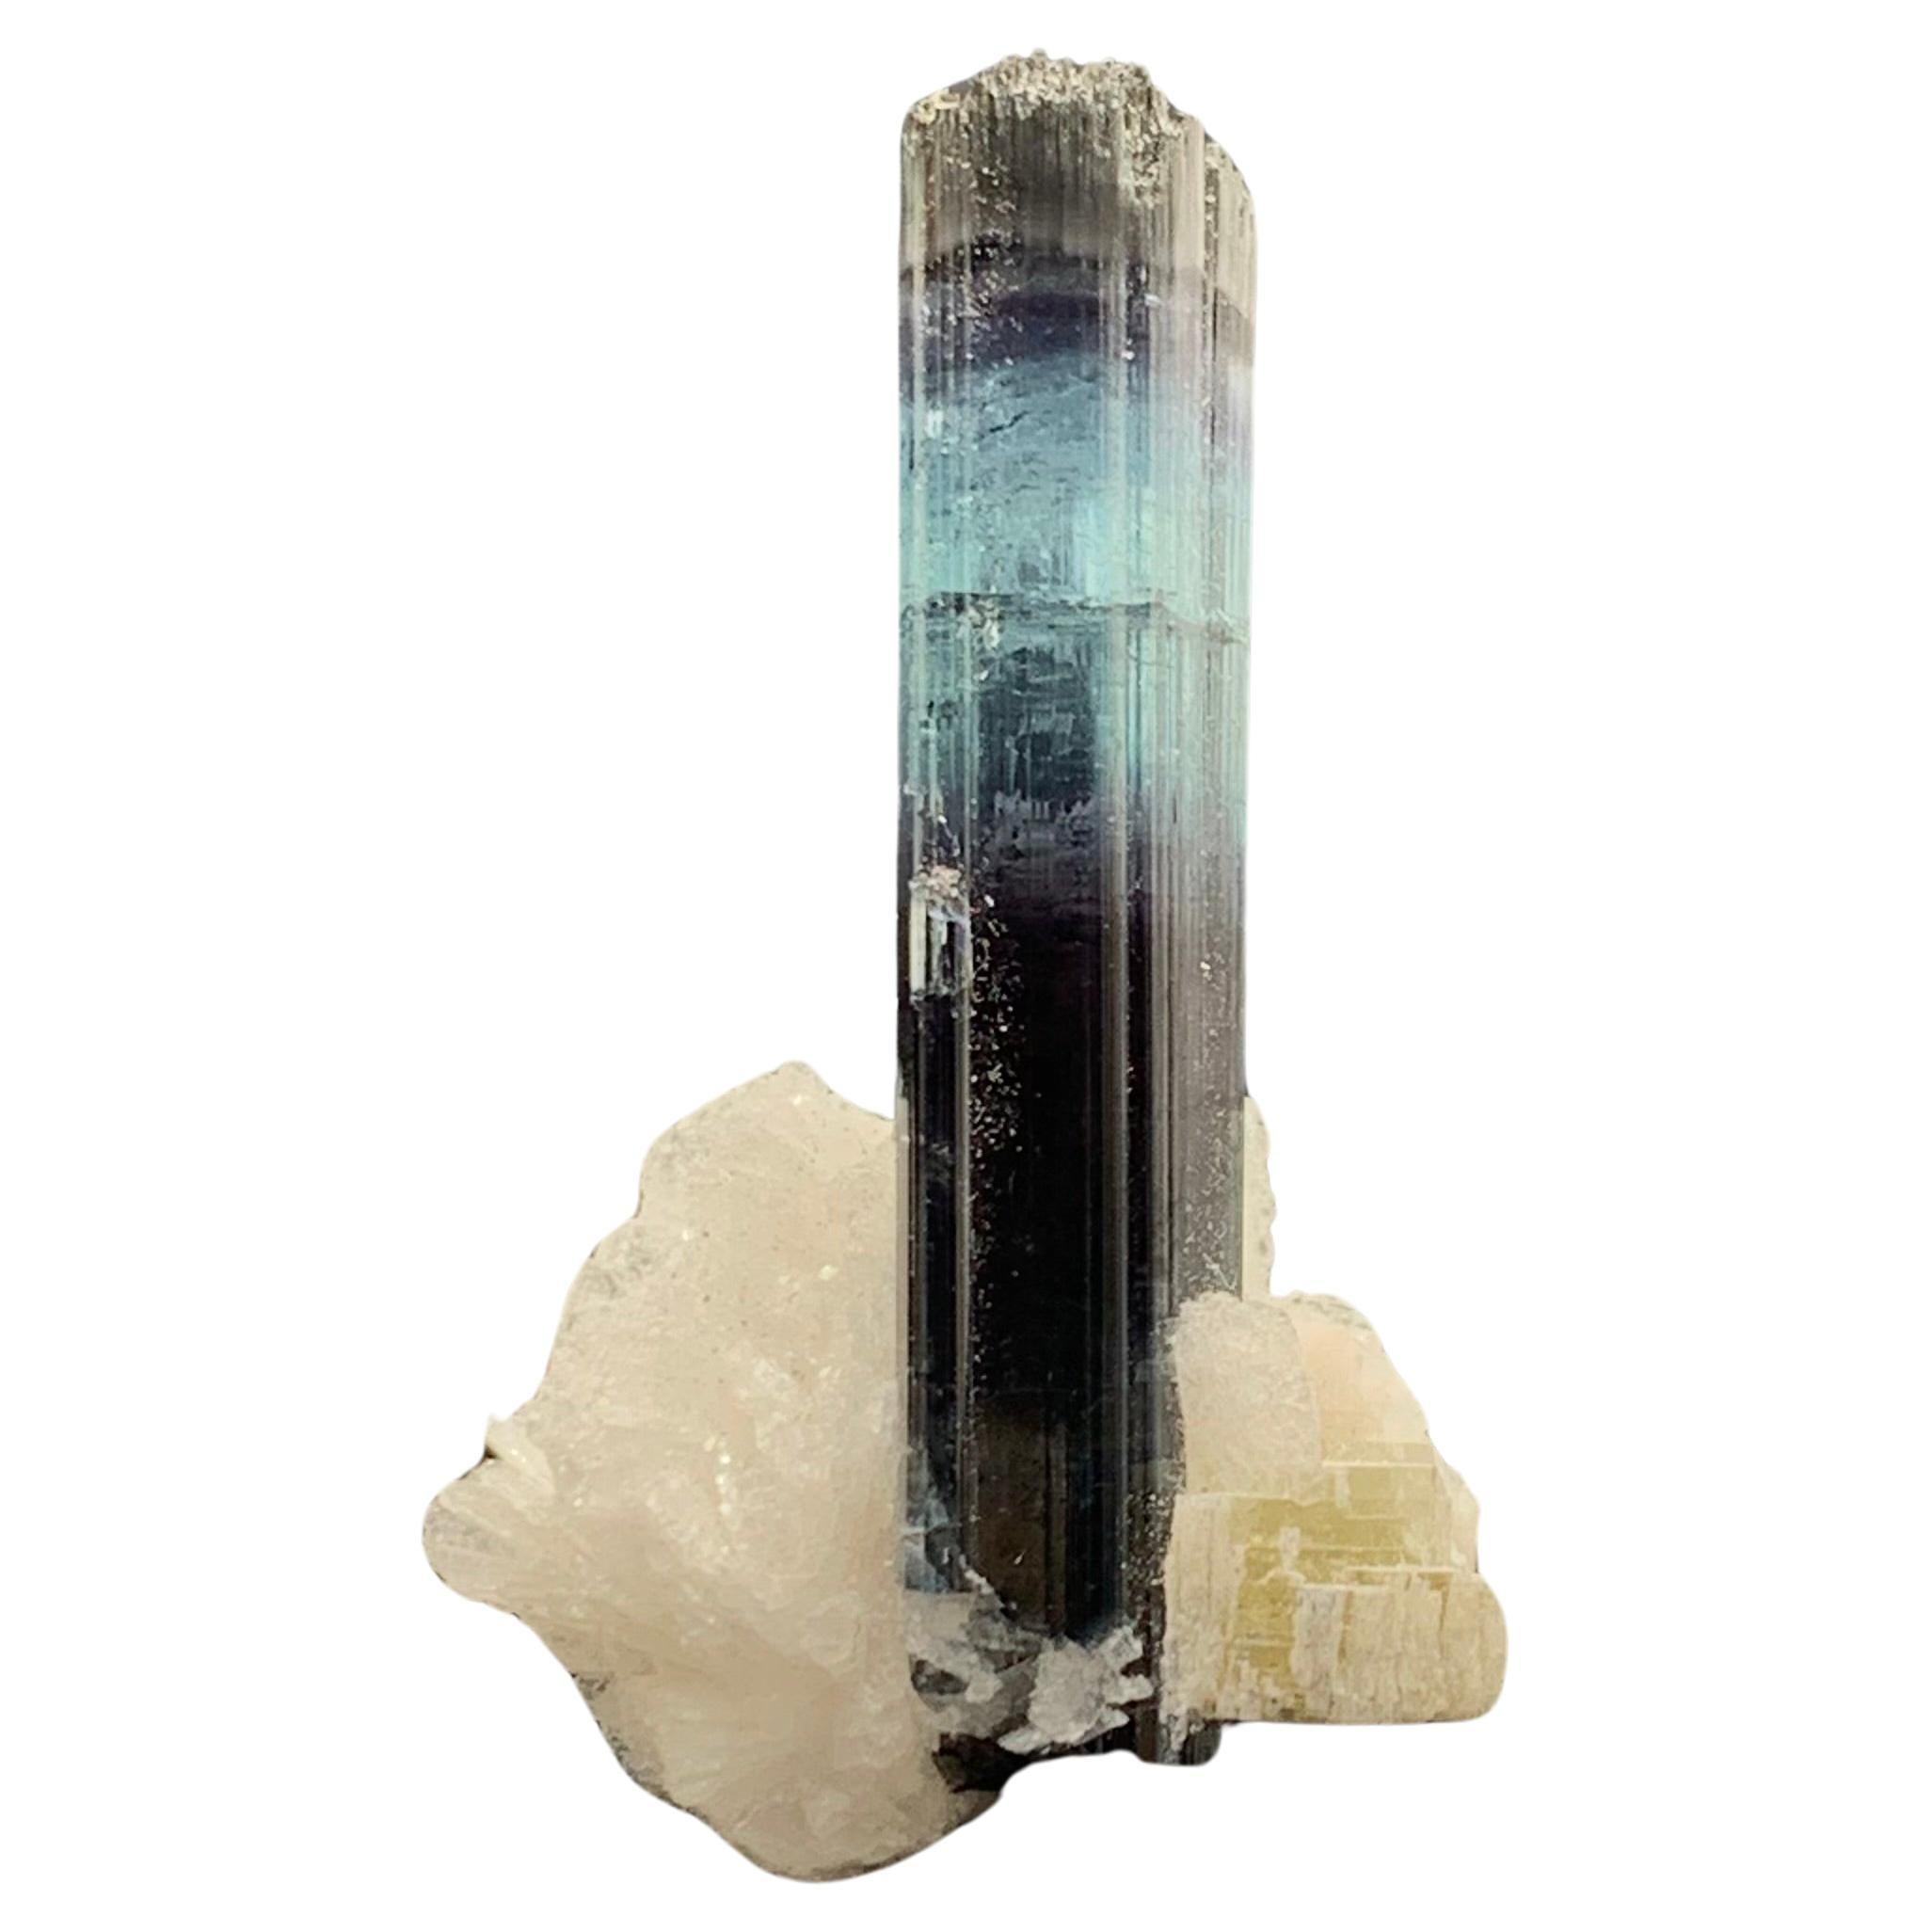 16.00 Carat Glamorous Bi Color Tourmaline With Albite From Kunar, Afghanistan  For Sale